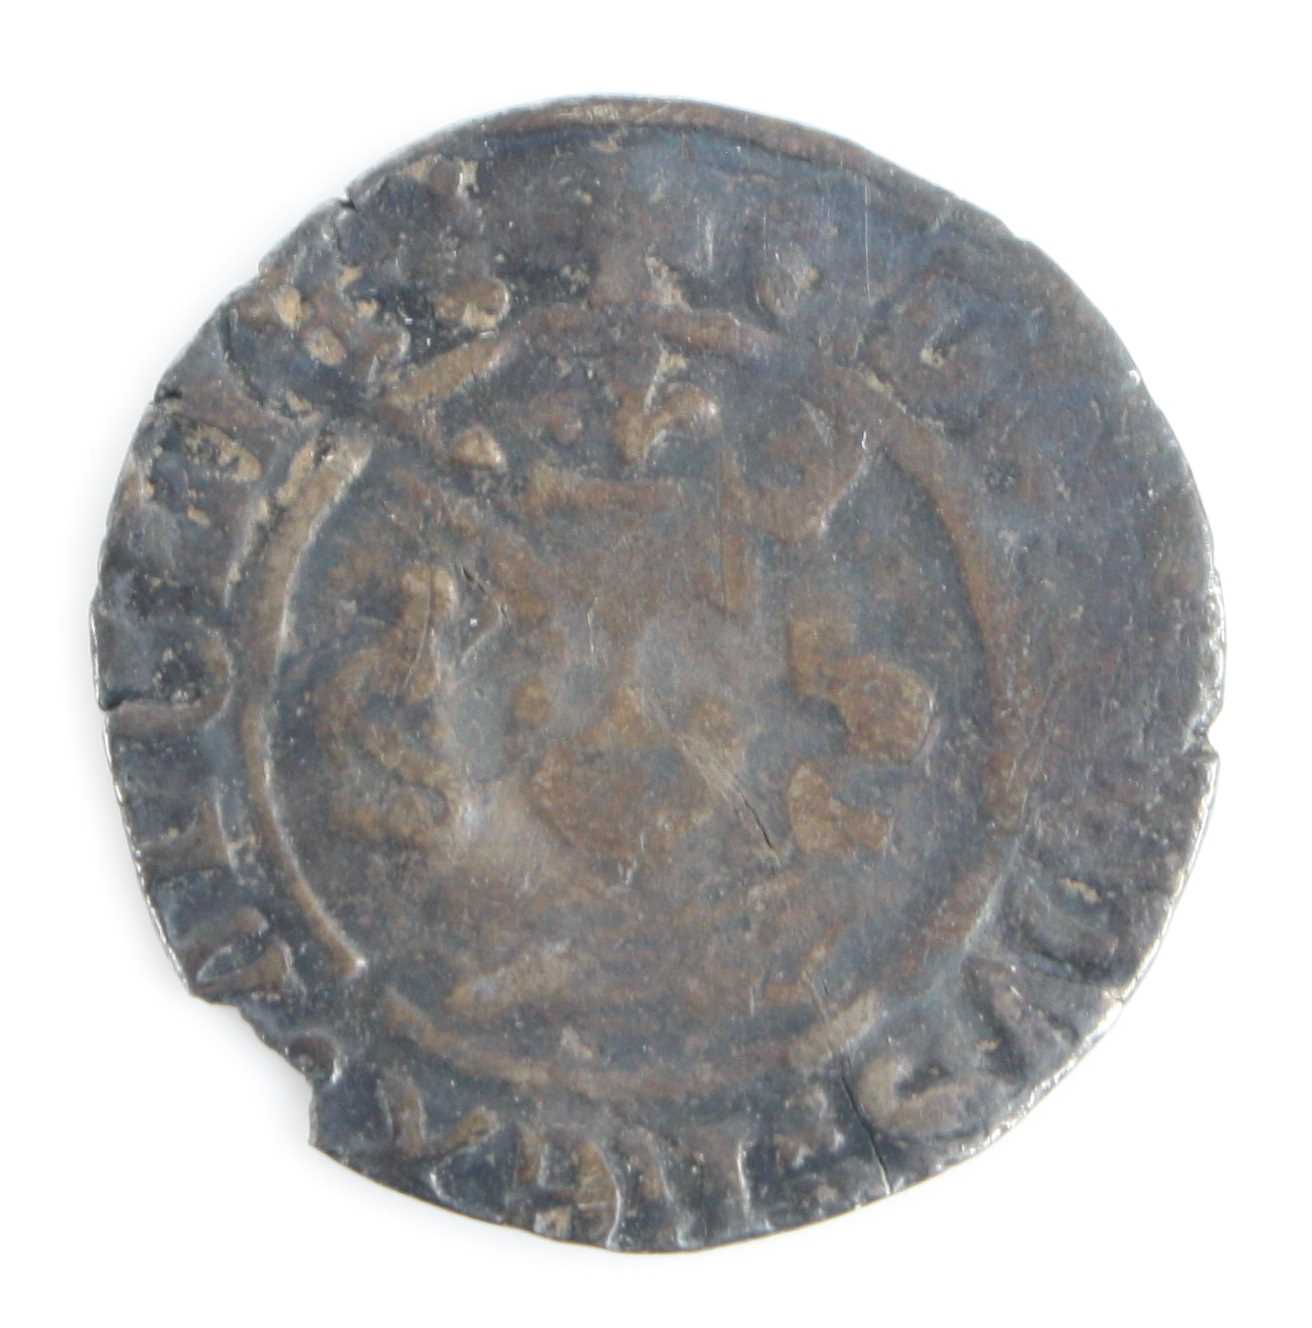 England, Edward III silver penny, first coinage 1327-35, obv: crowned facing portrait, rev: long